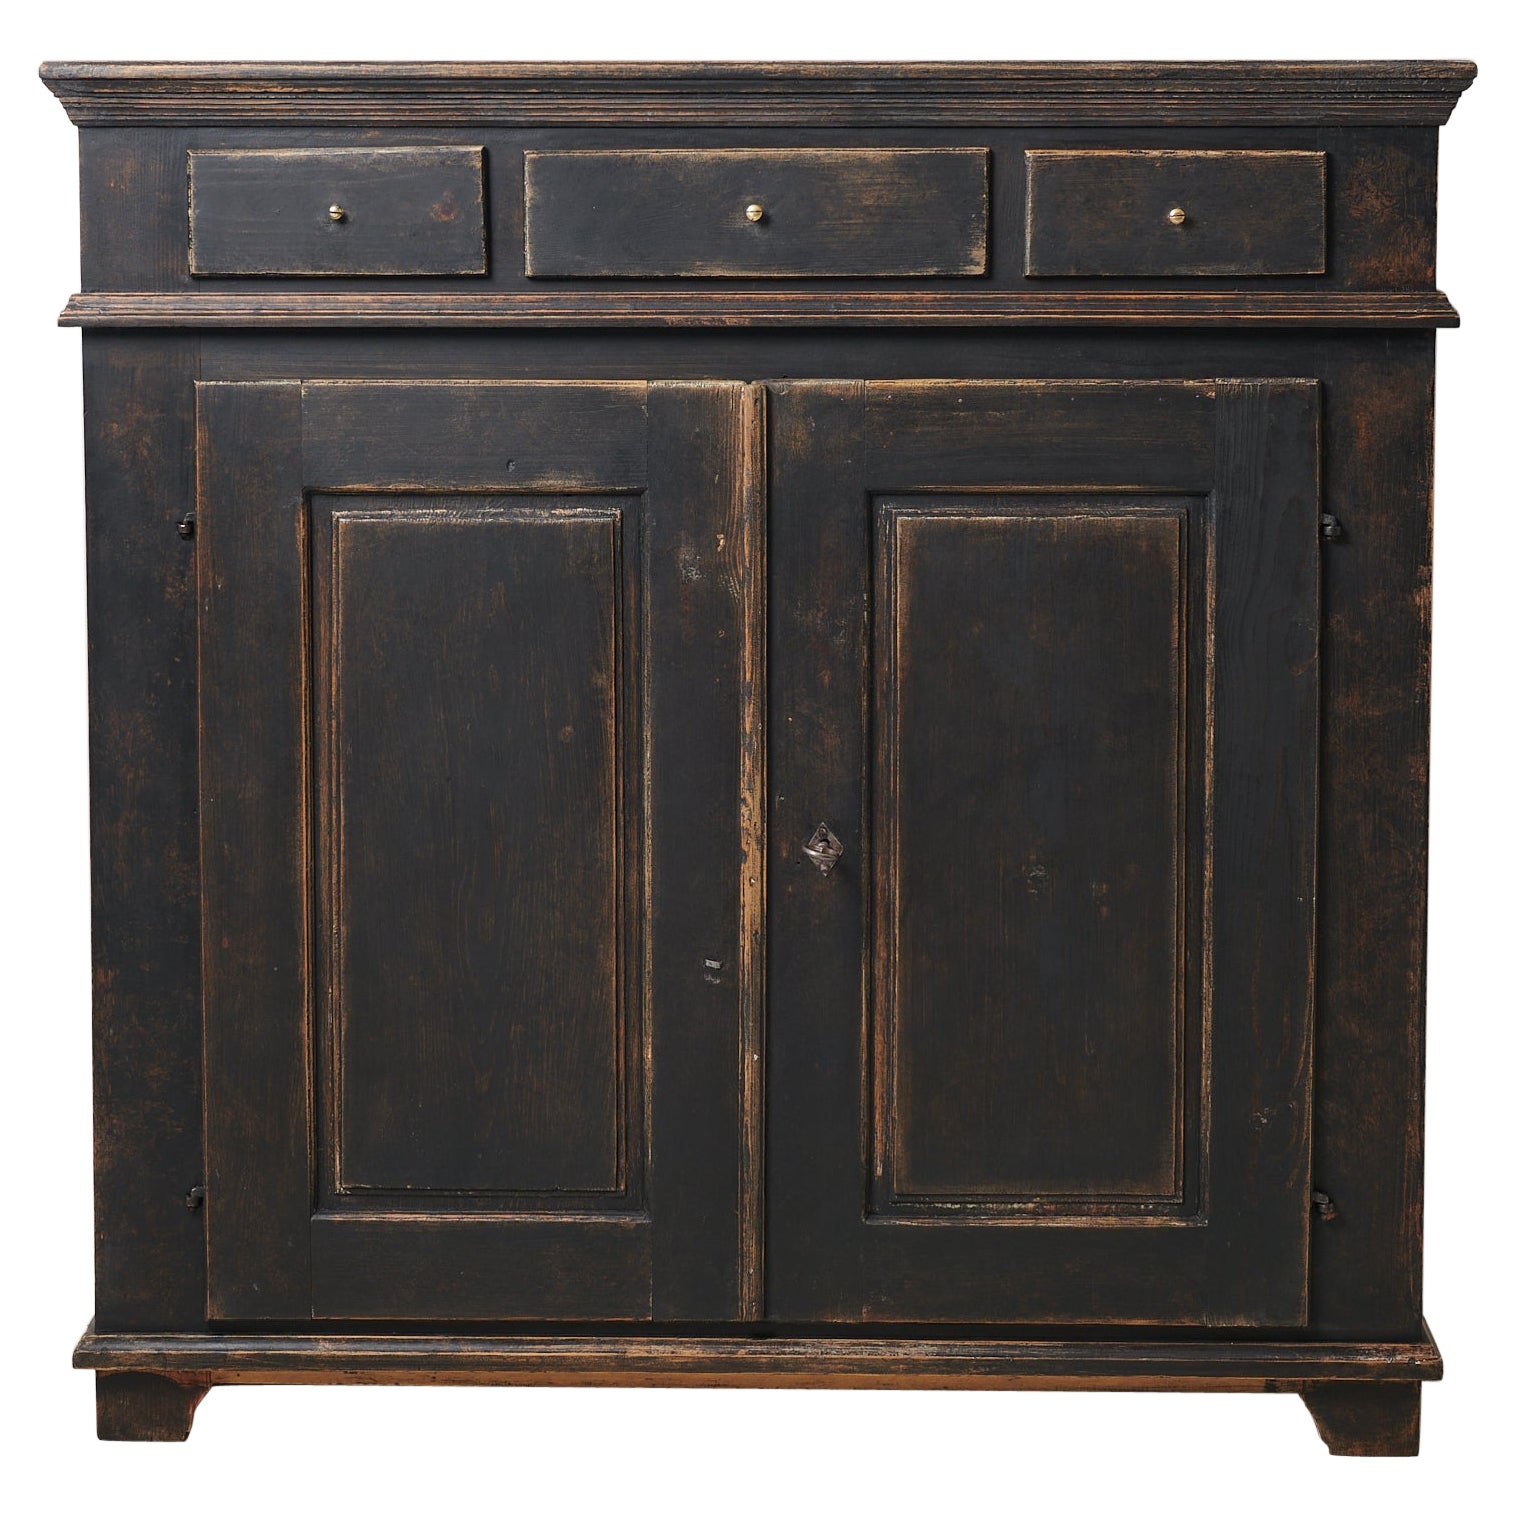 Antique Swedish Black Country House Sideboard